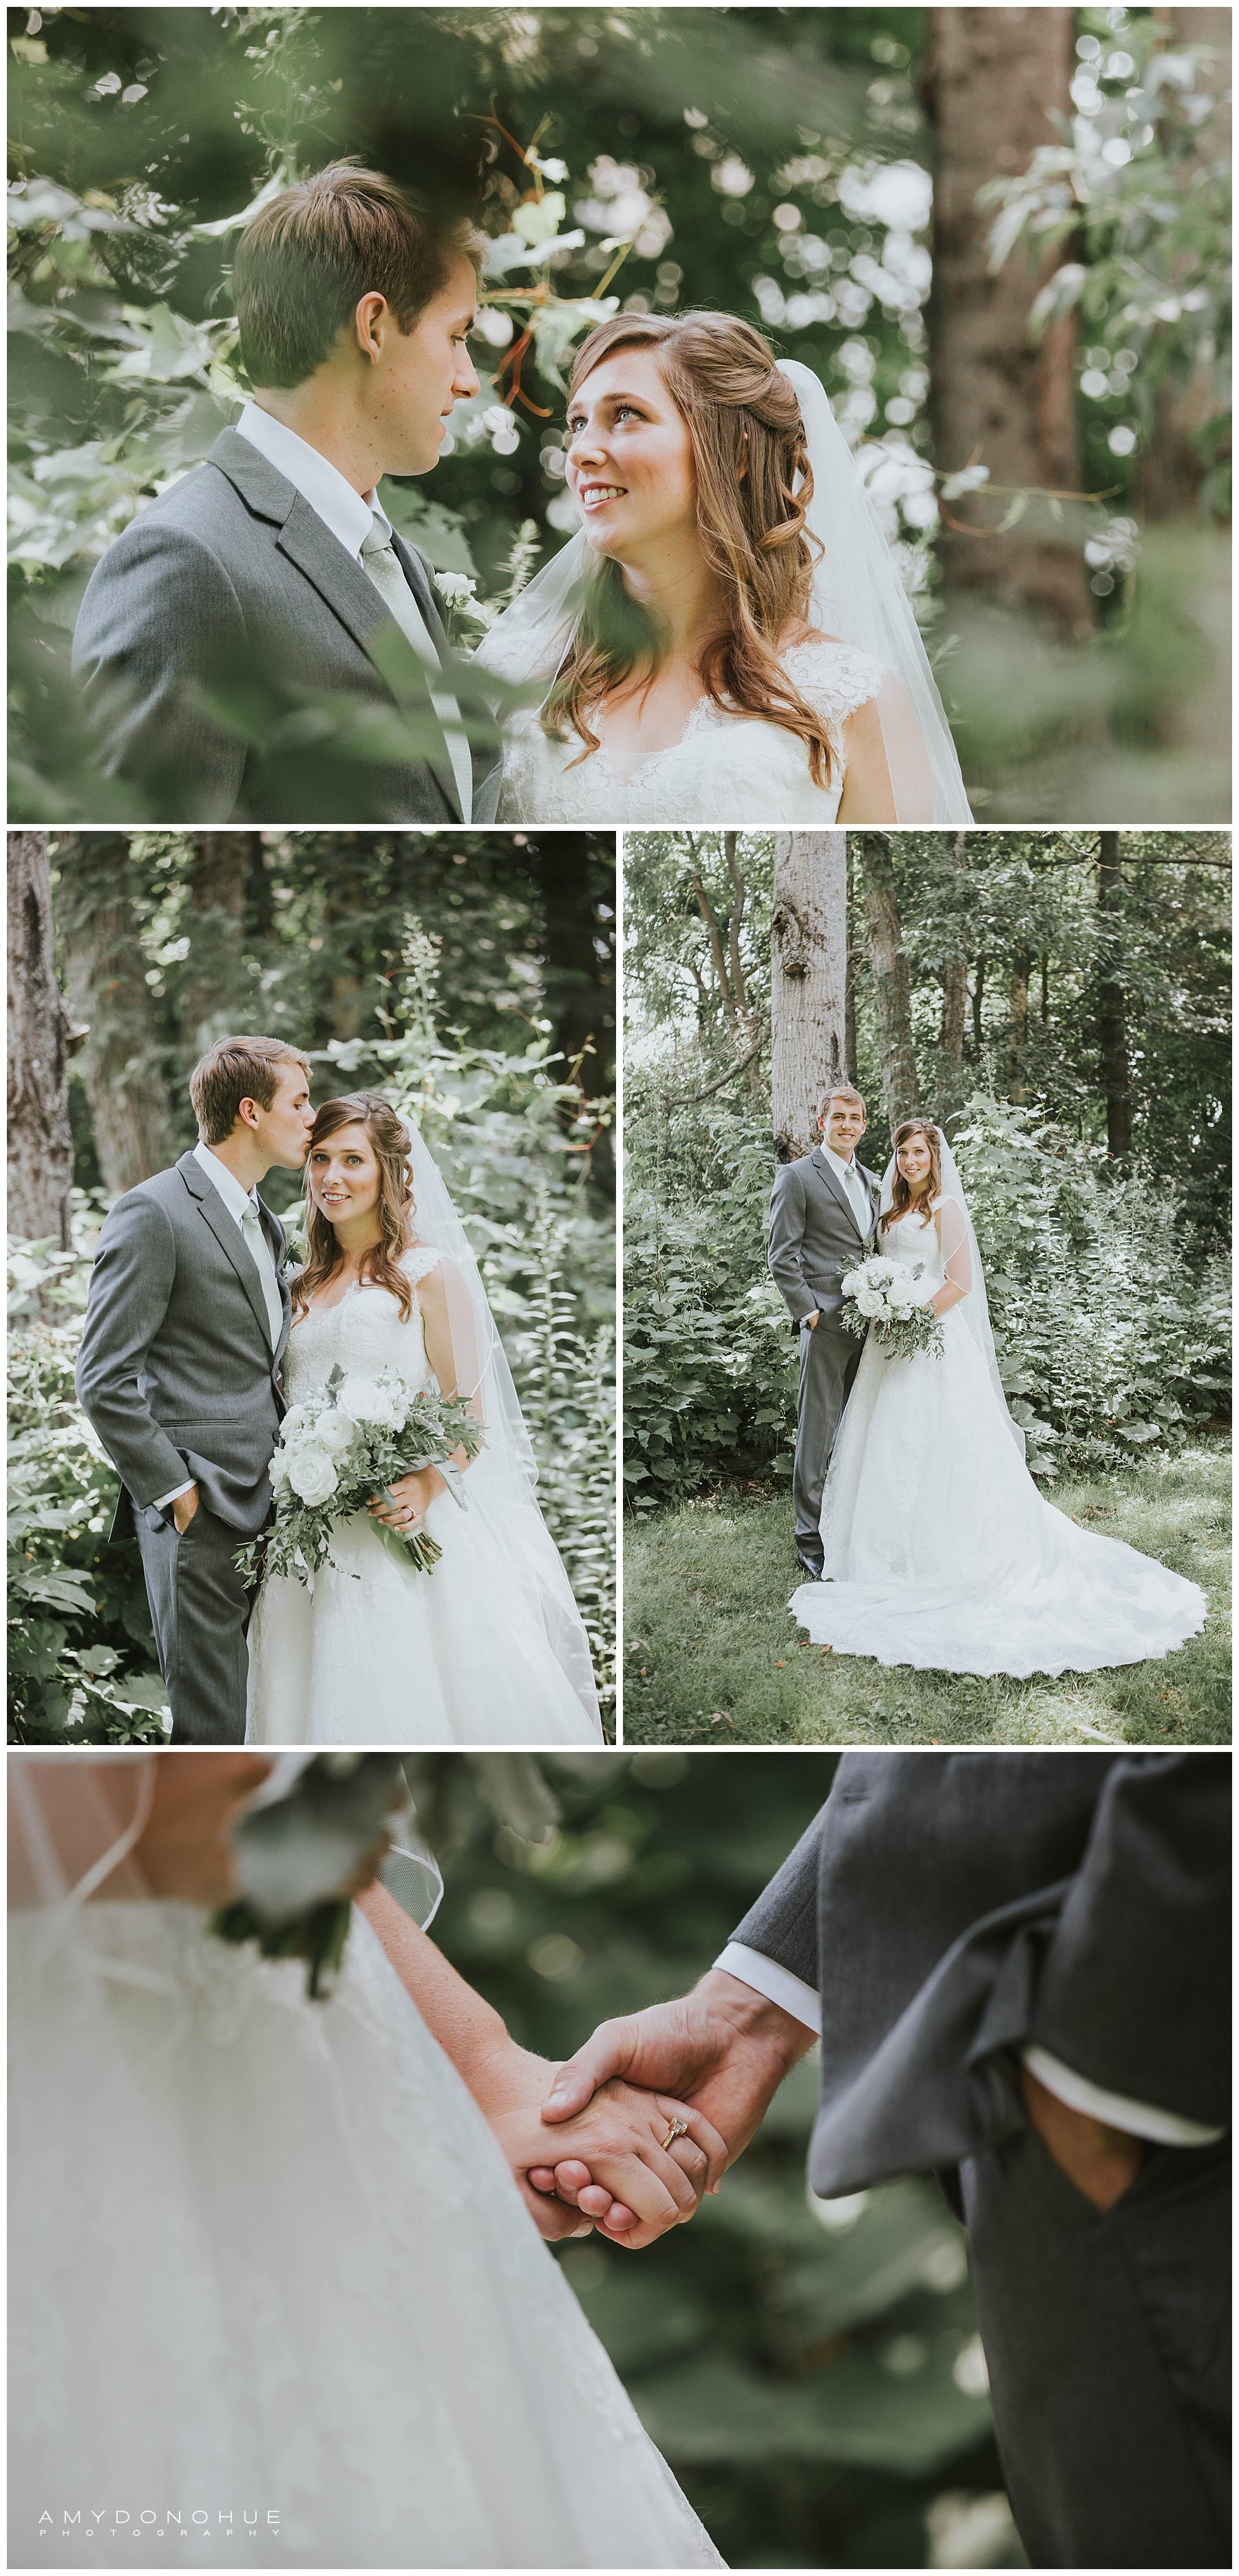 Bride and Groom Portraits | New Hampshire Wedding Photographer | © Amy Donohue Photography